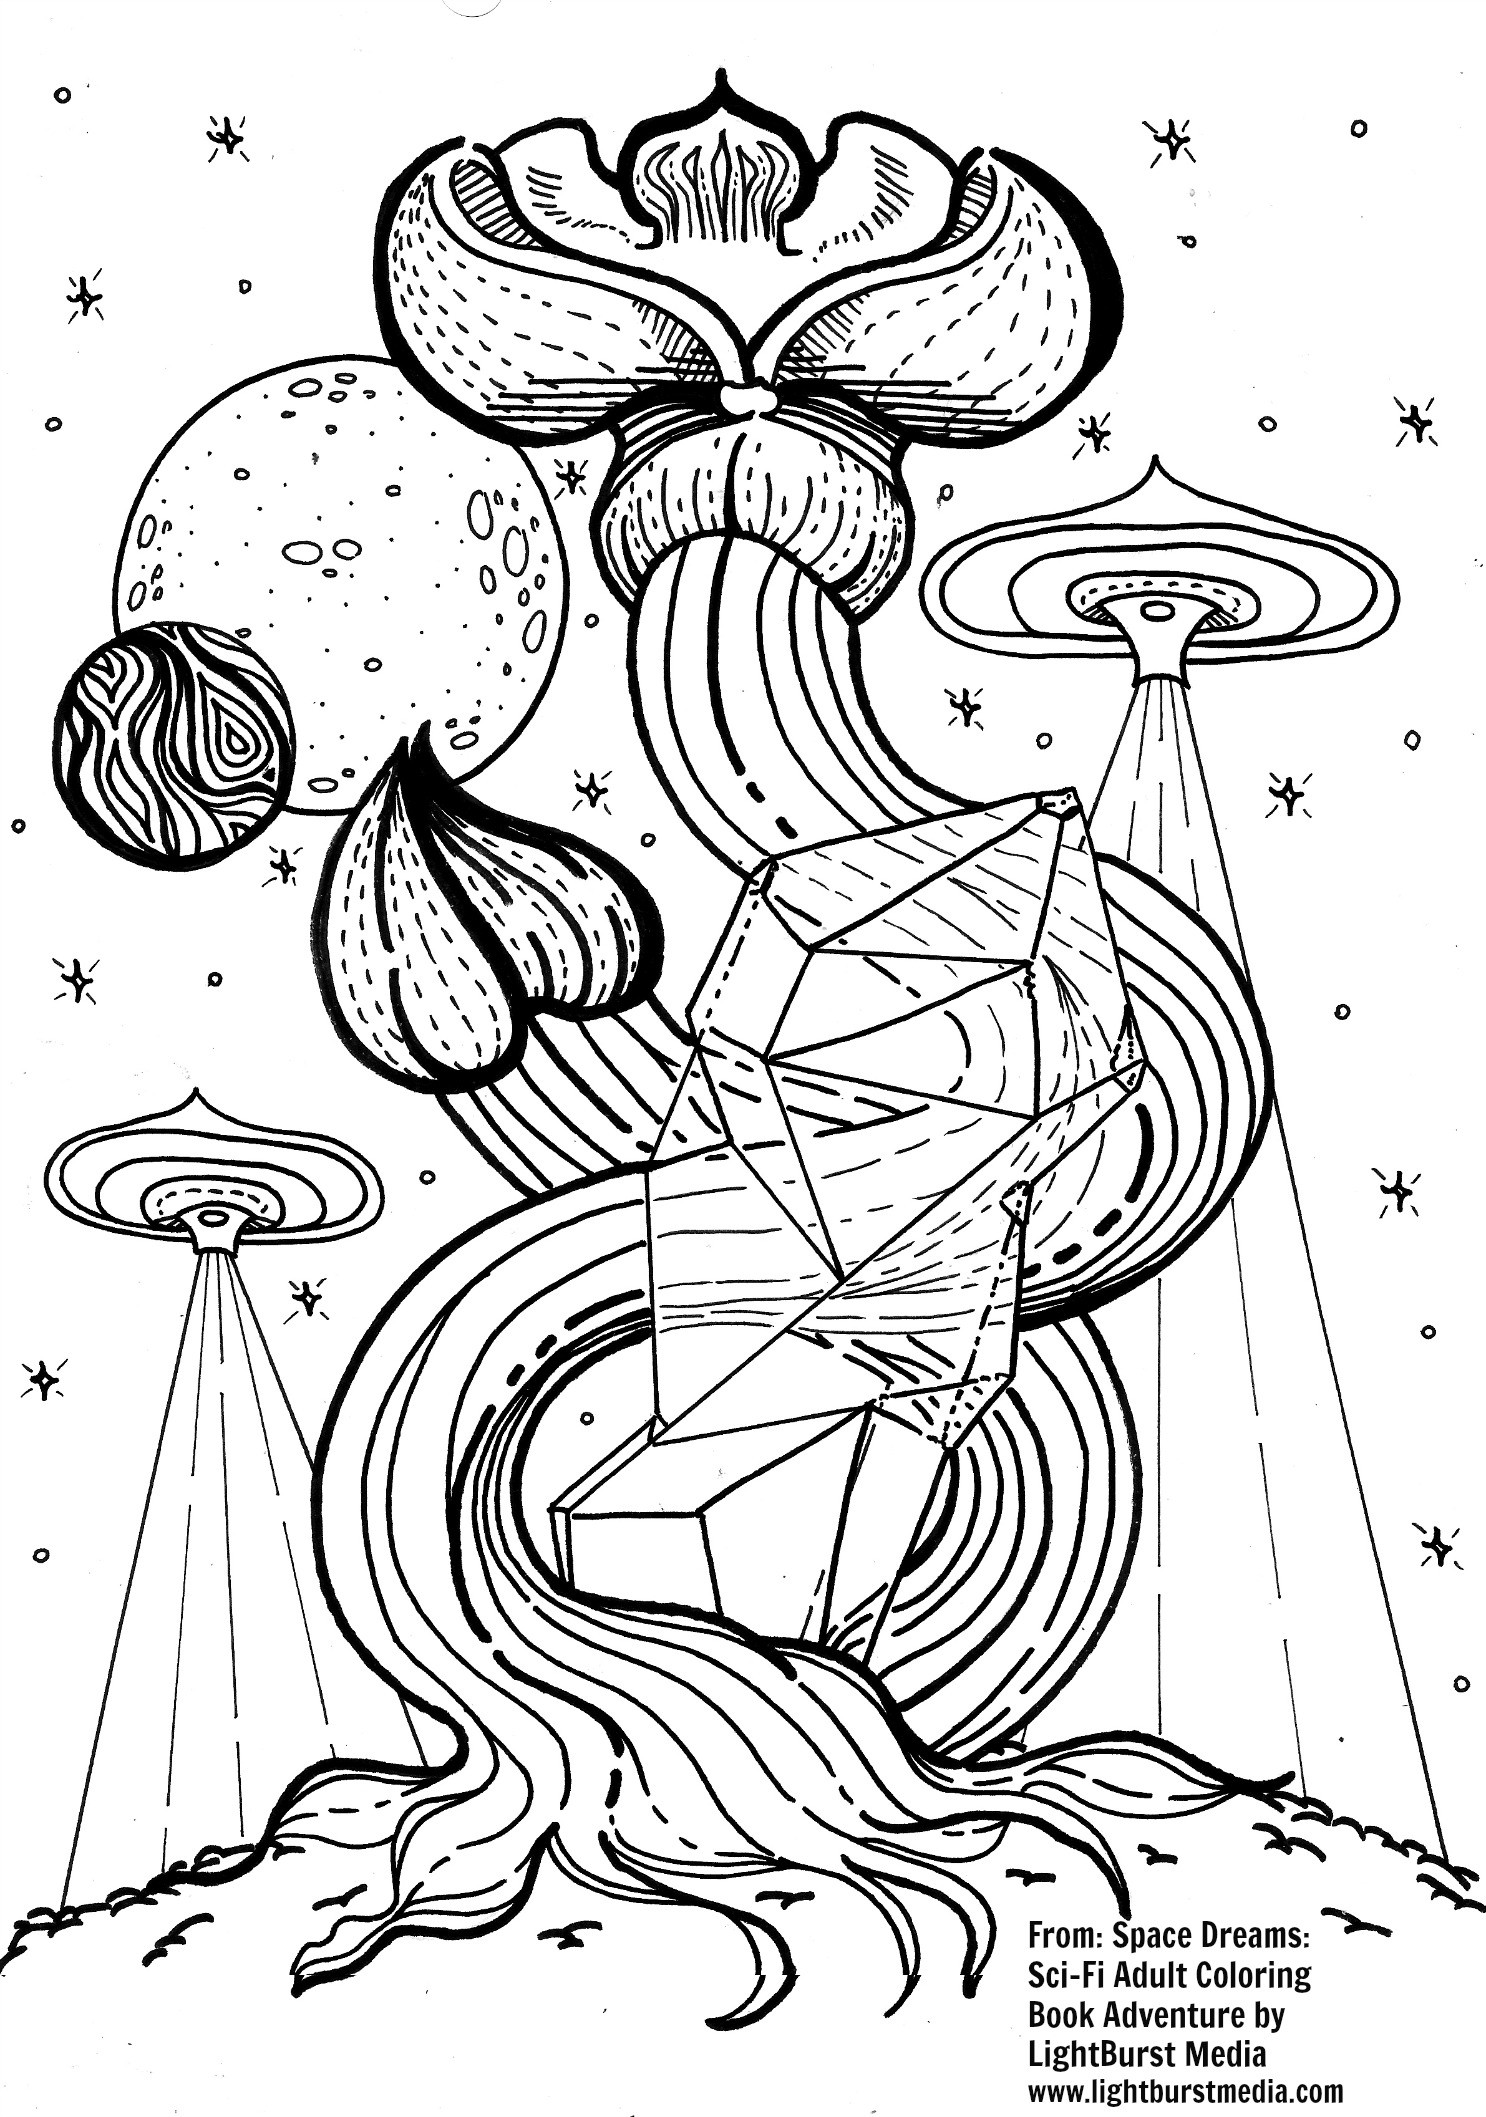 Adult Coloring Book Images
 FREE Coloring Pages – Adult Coloring Worldwide